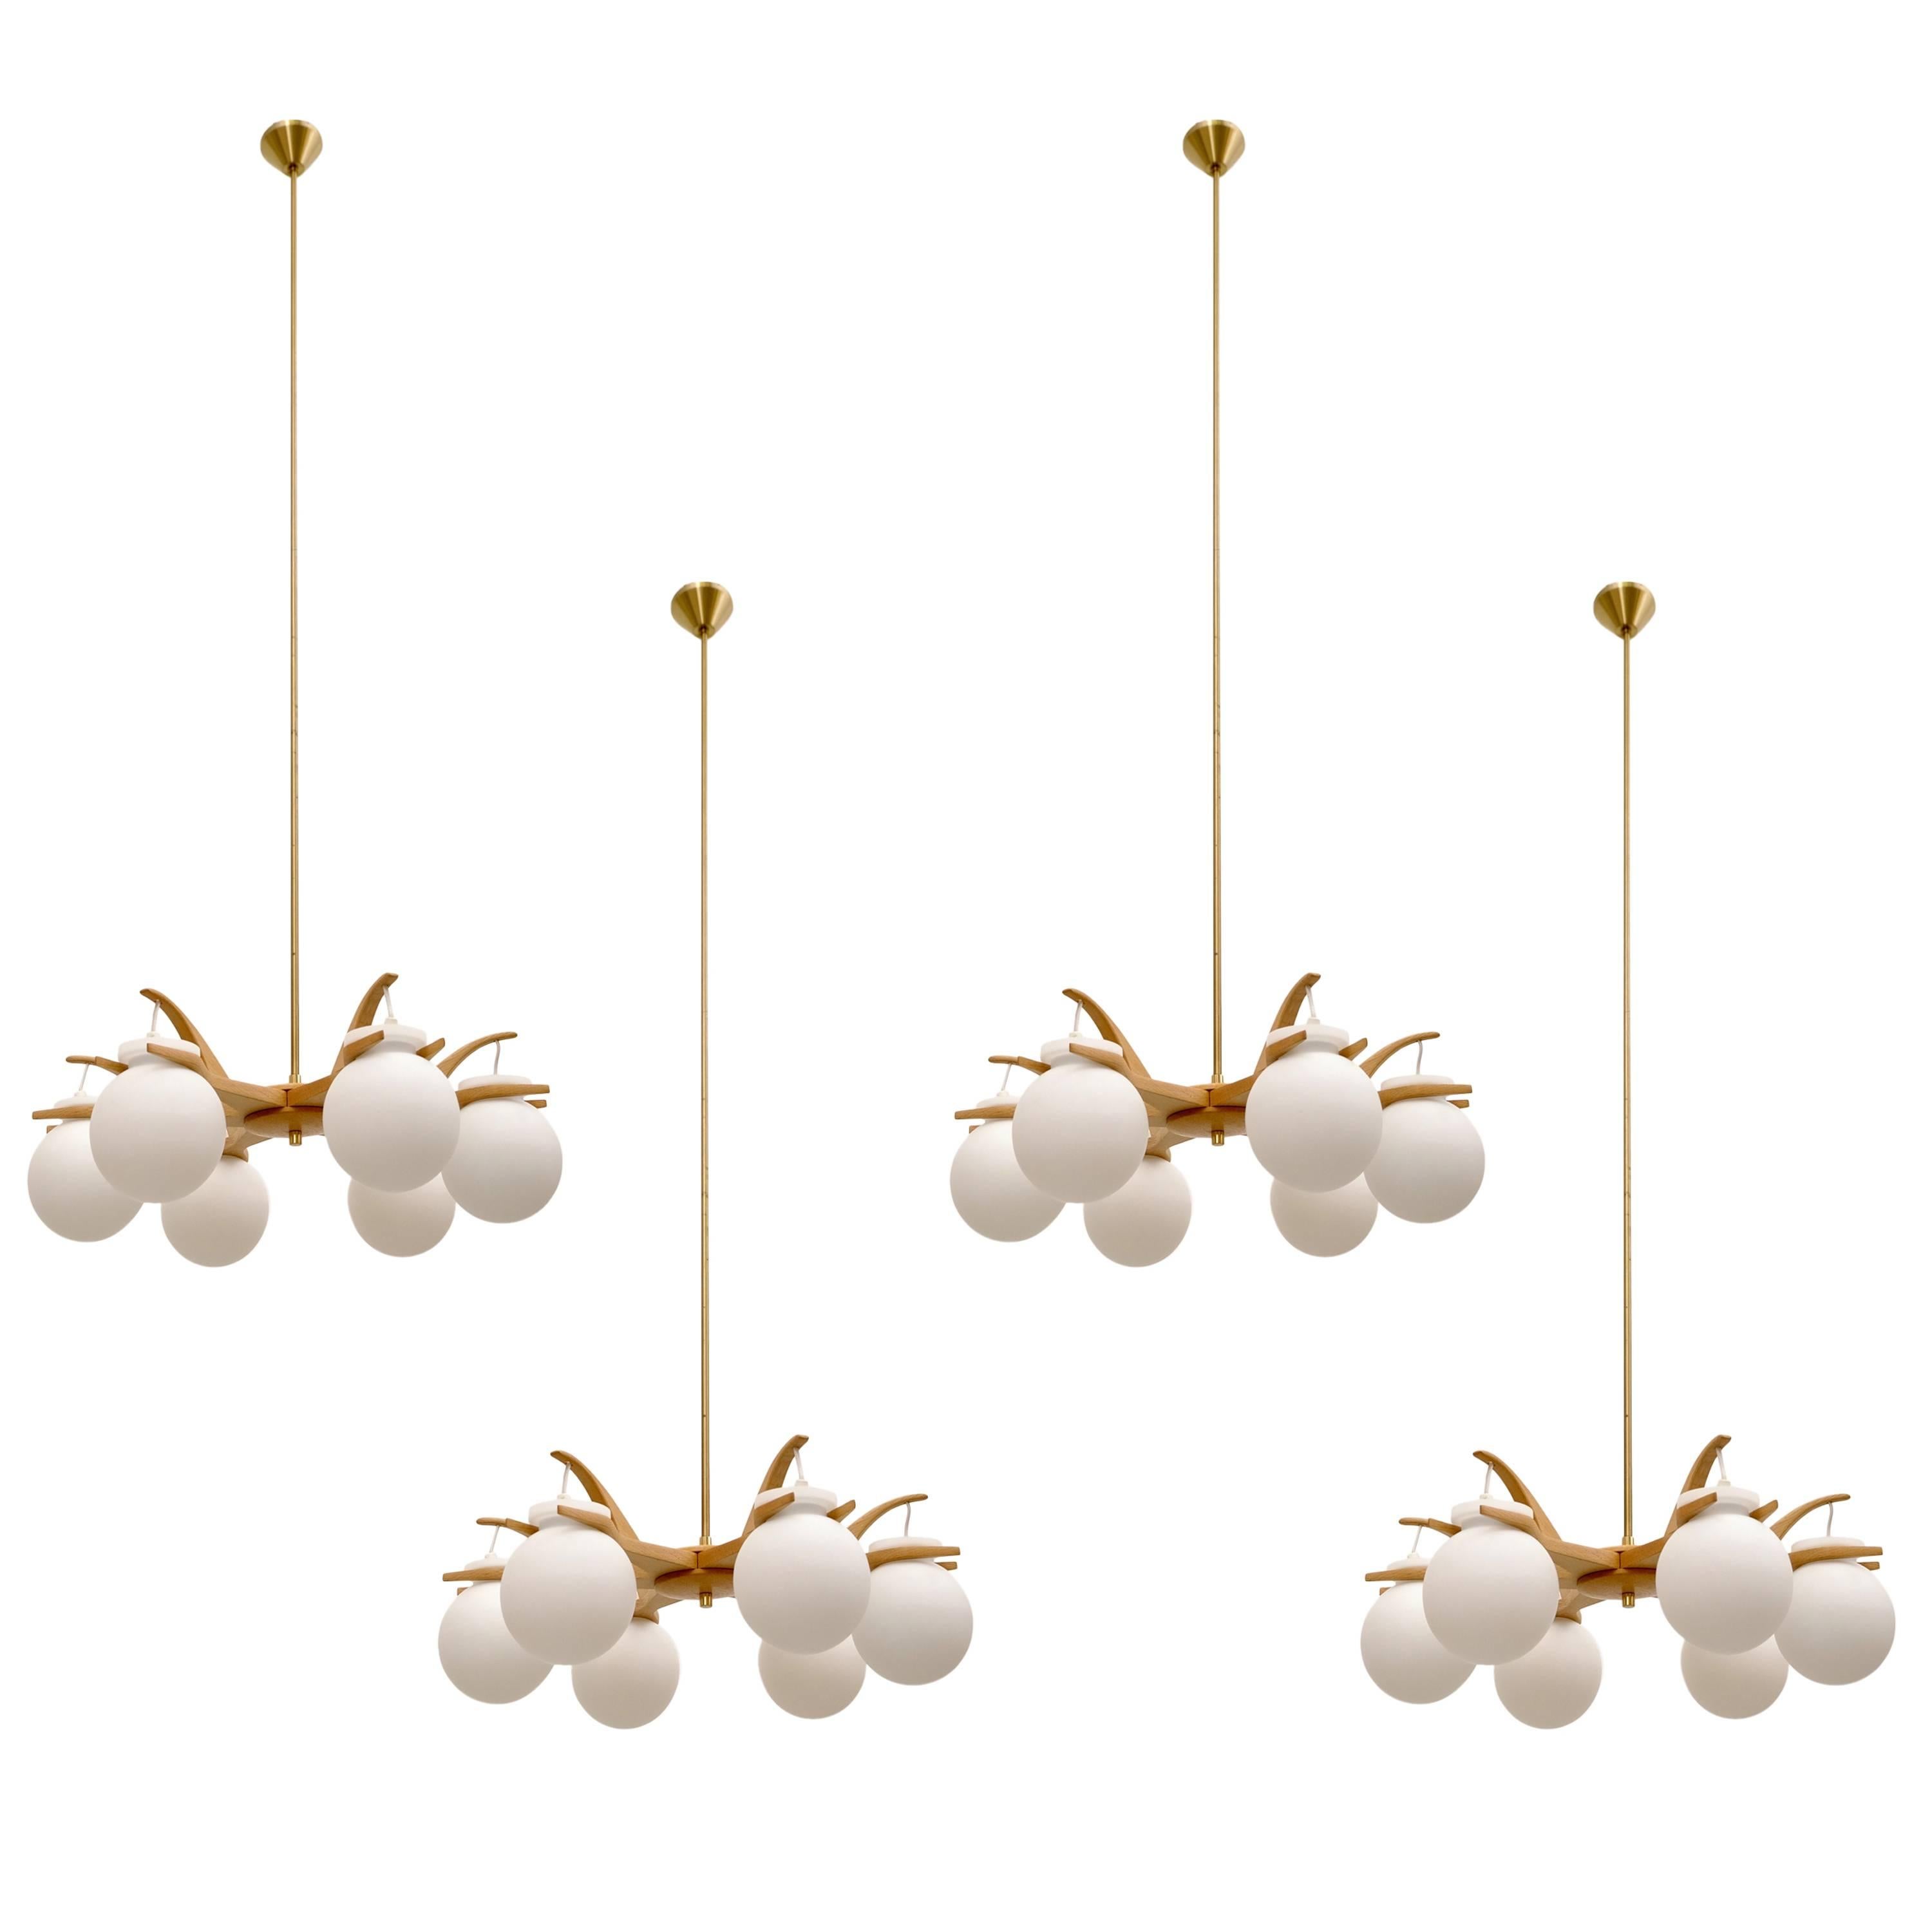 Rare pair of Oak and Brass Chandeliers by Luxus, Sweden, 1960s